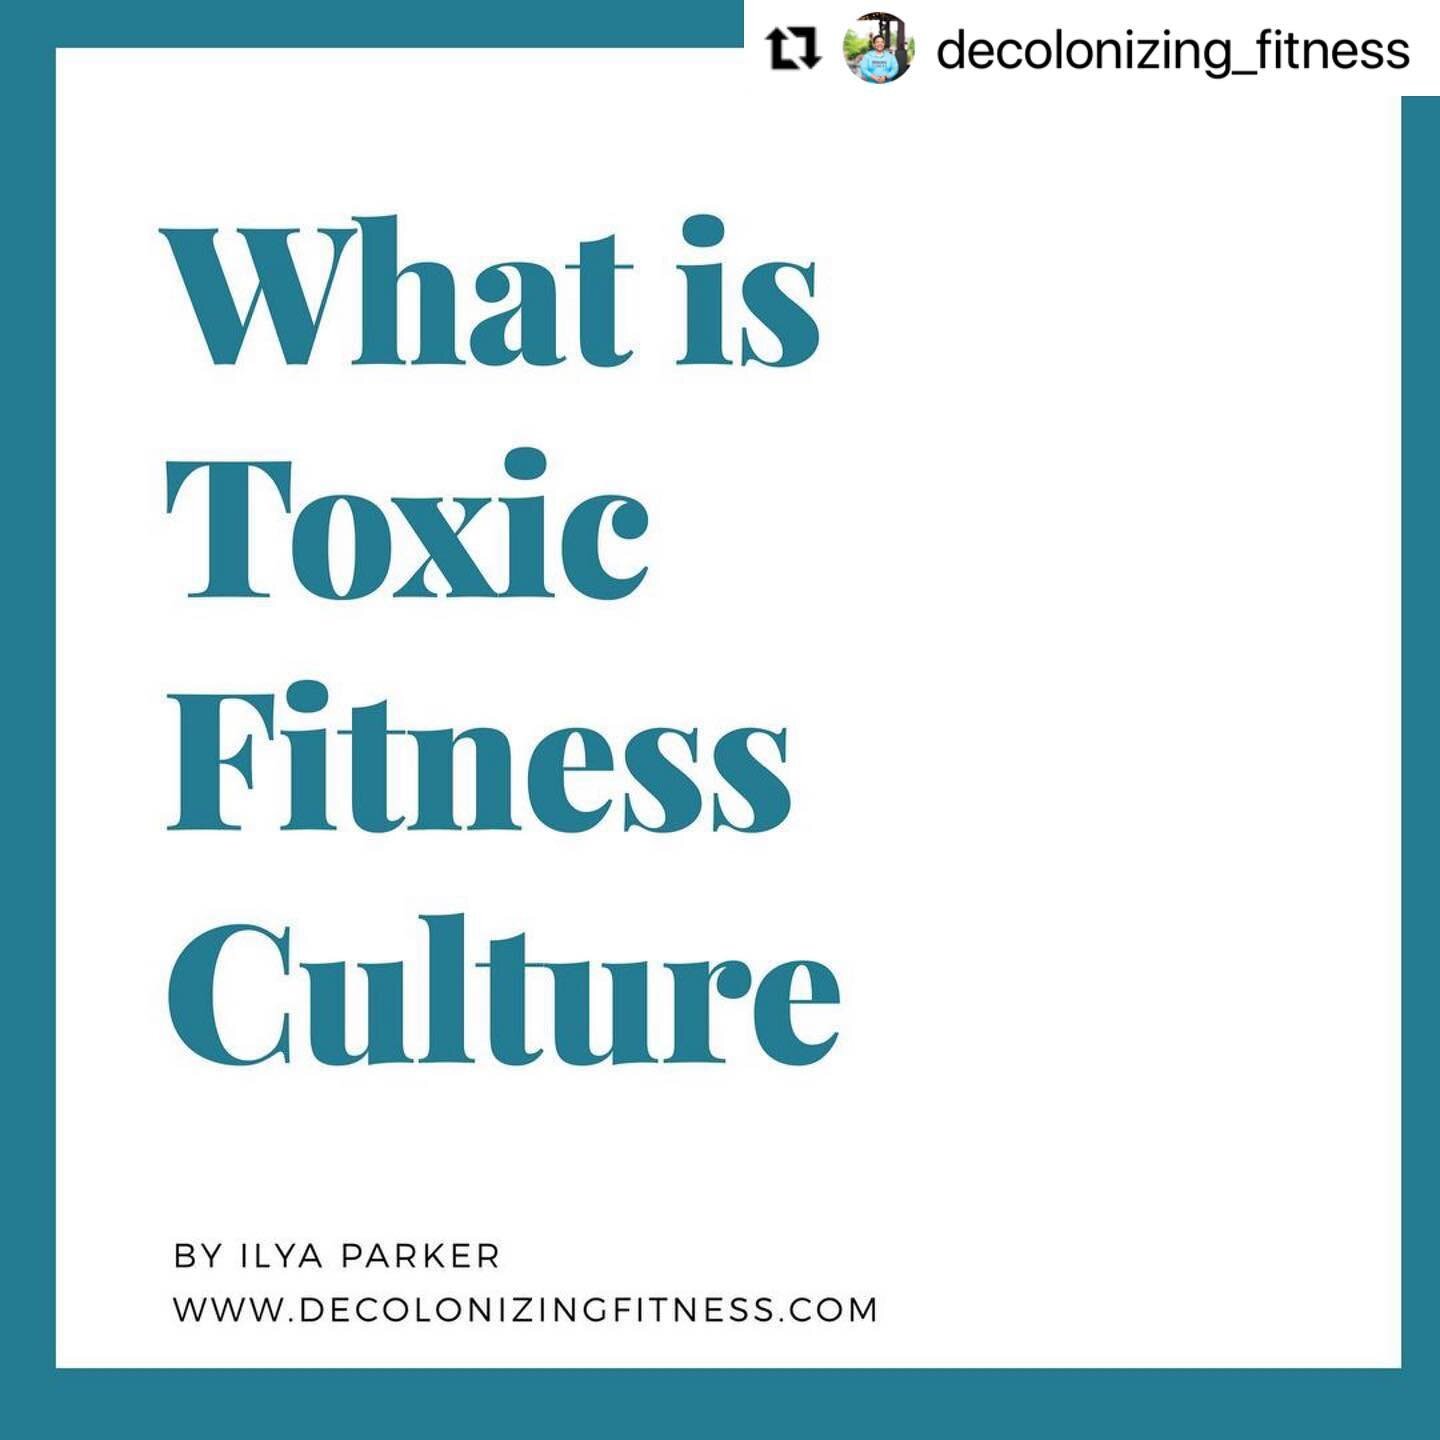 What resources have you invested in to help you unlearn and divest from toxic fitness culture?
.
One of the resources I look to is @decolonizing_fitness Patreon and I can&rsquo;t recommend Ilya&rsquo;s work highly enough.
.
I&rsquo;m grateful for the